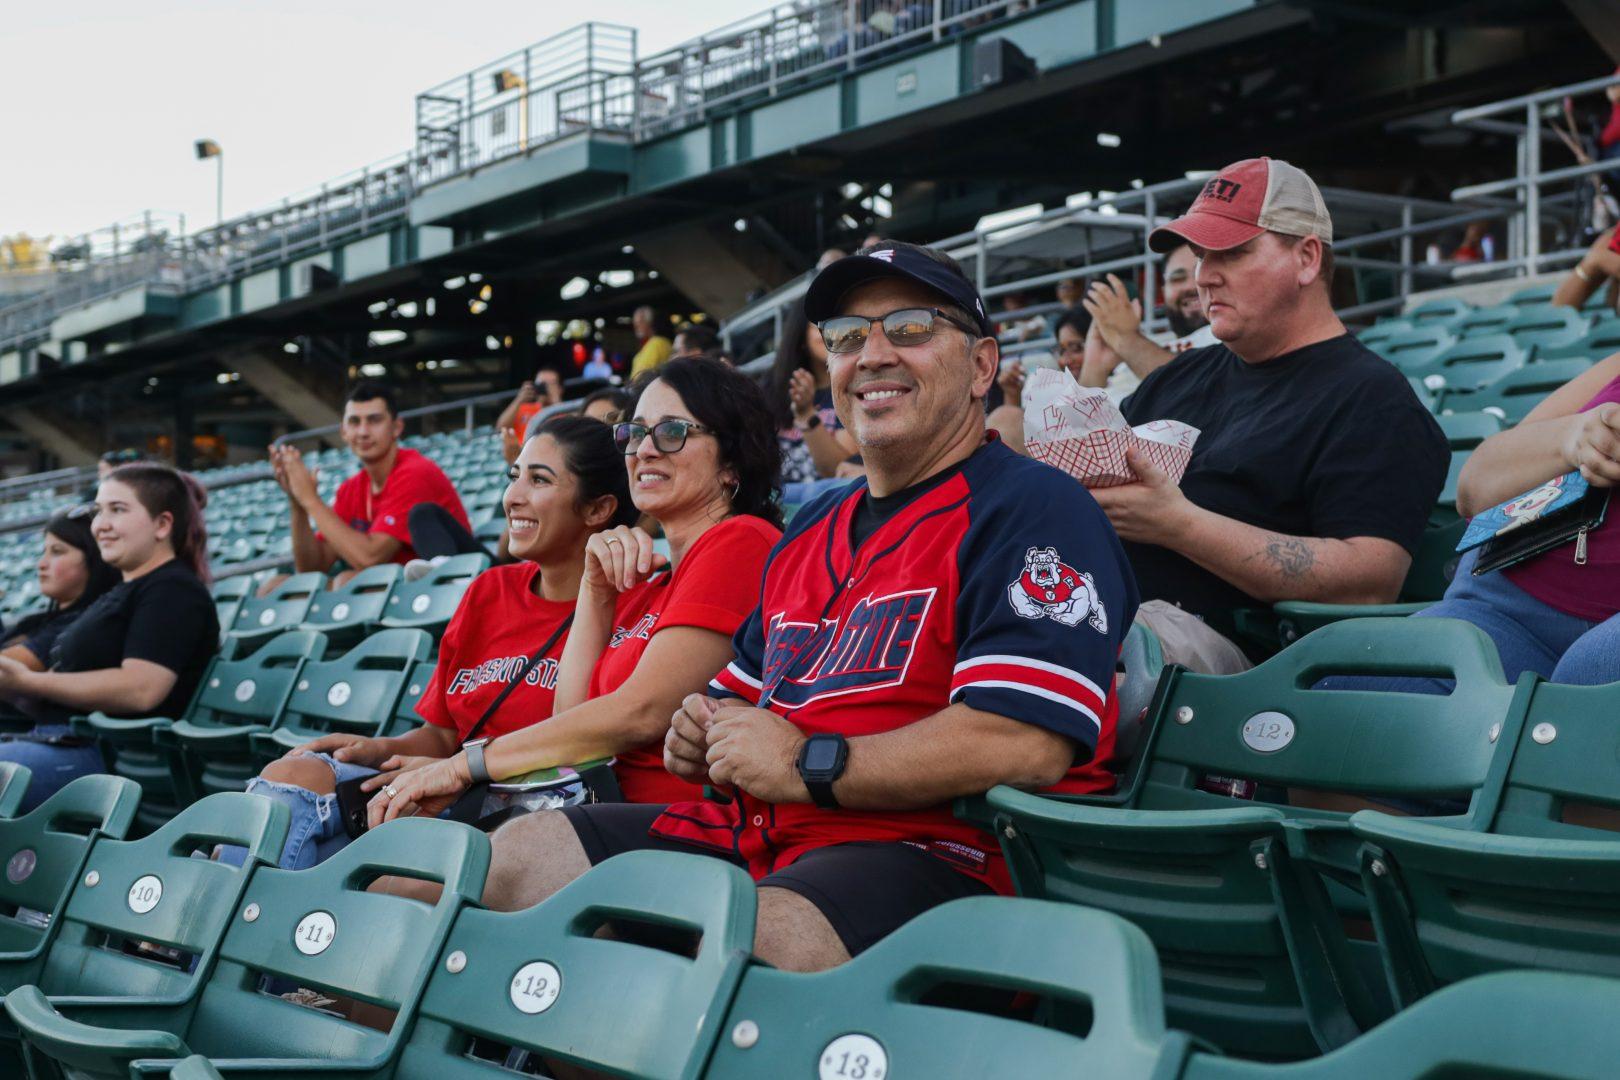 Fans enjoyed Fresno State Night at Chukchansi Park while they cheered on the Grizzlies on Aug. 27, 2022. (Carlos Rene Castro/ The Collegian)